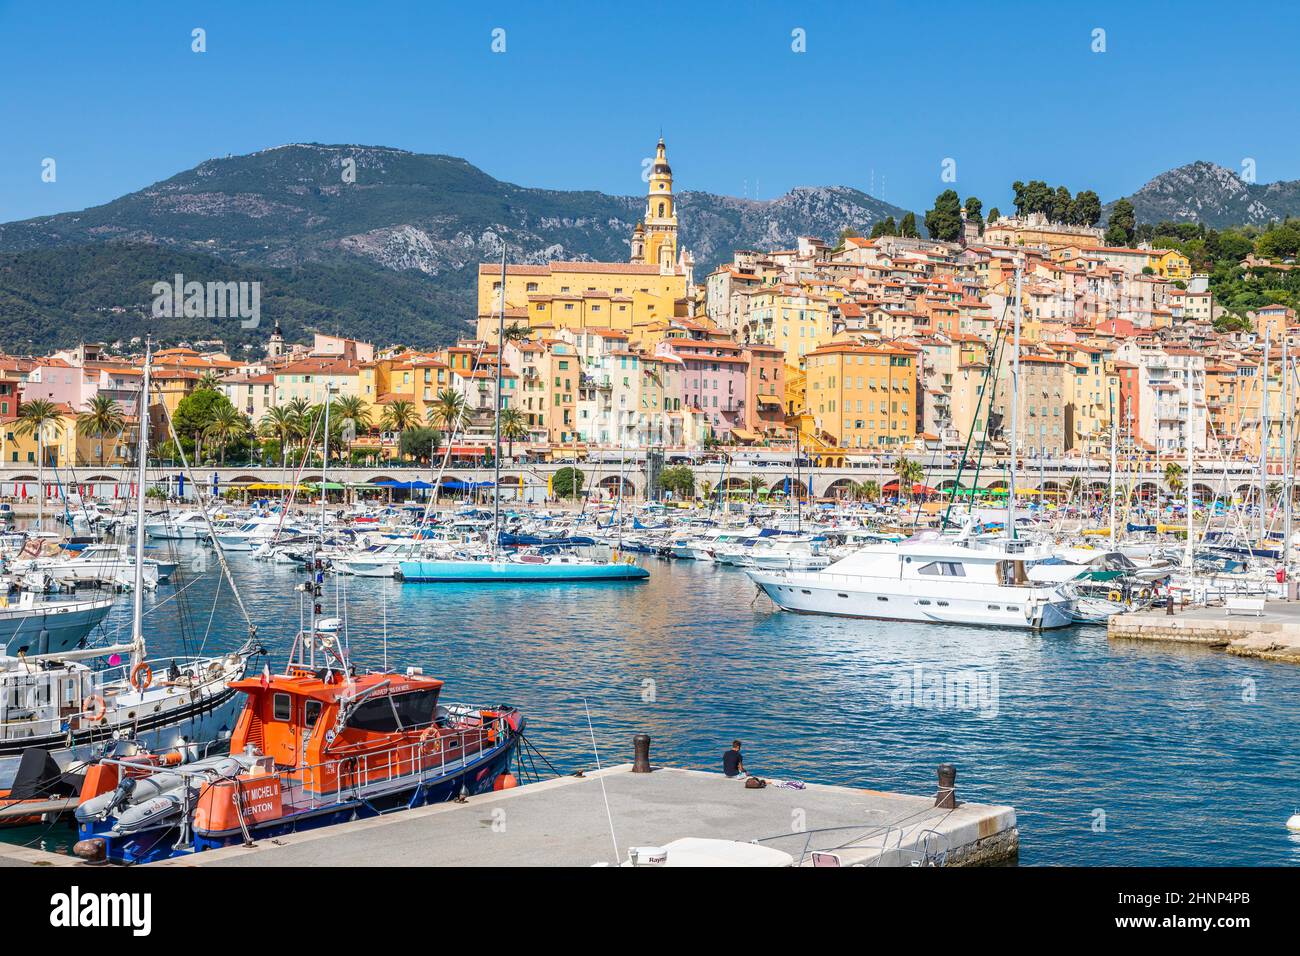 Menton on the French Riviera, named the Coast Azur, located in the South of France Stock Photo